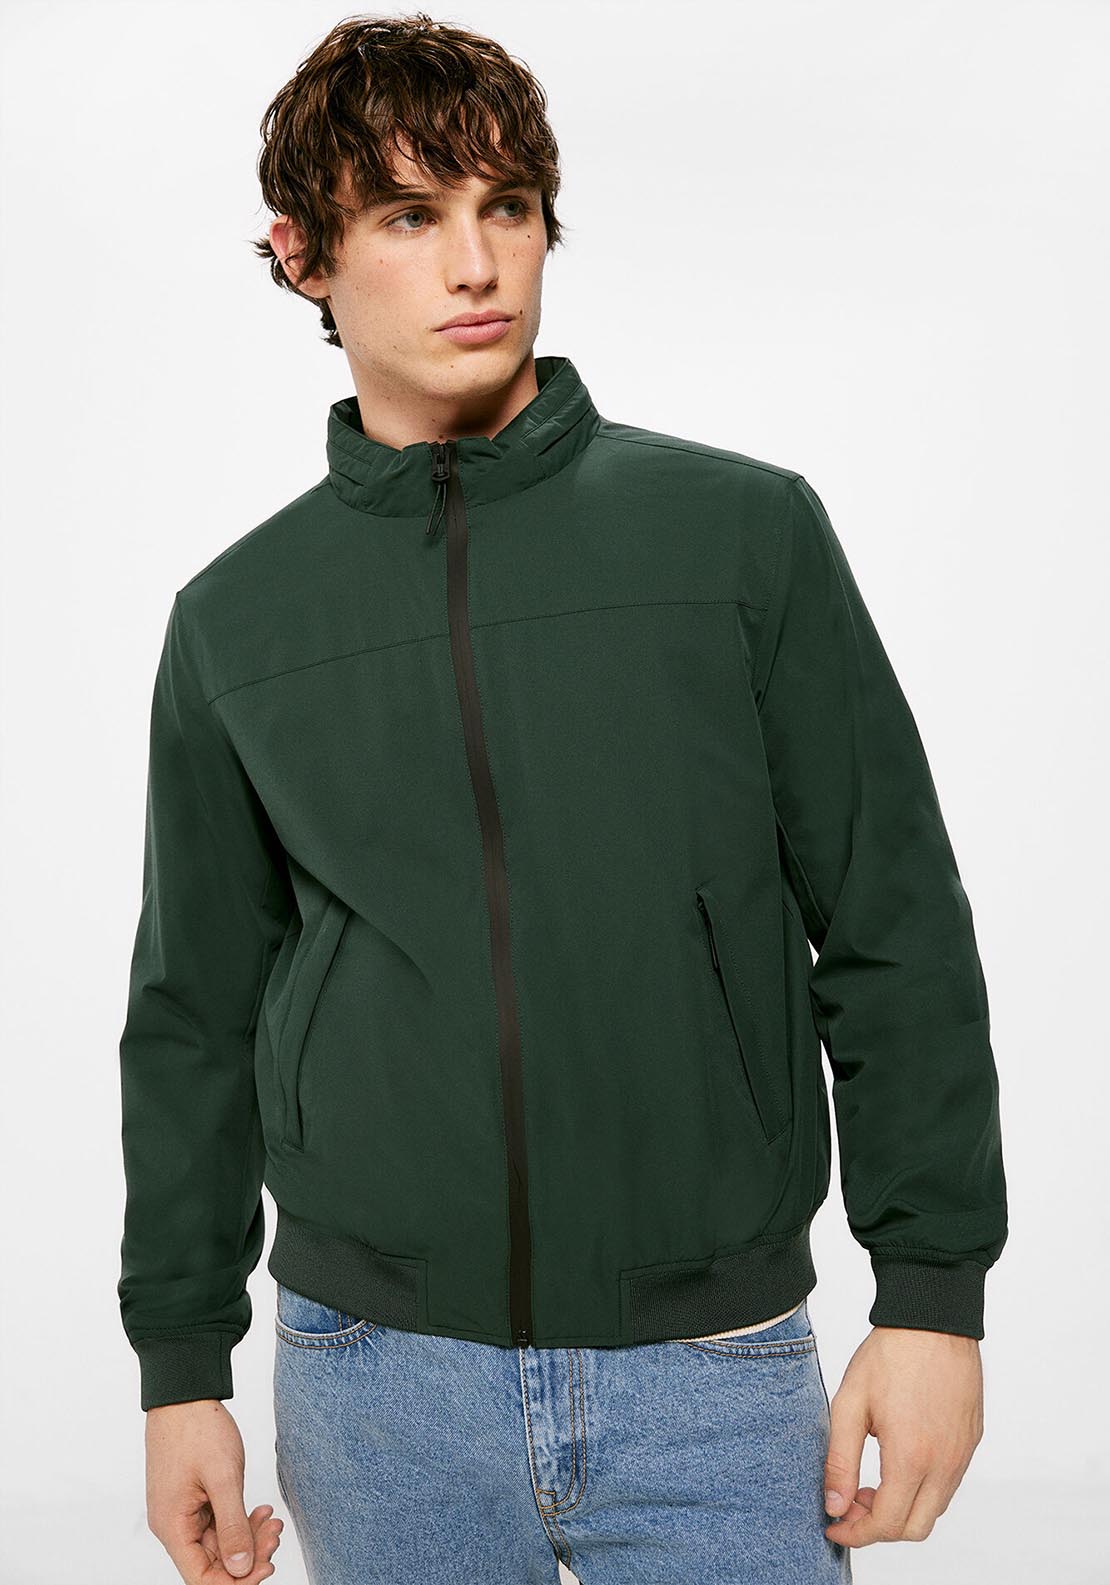 Springfield Technical jacket - Green 3 Shaws Department Stores